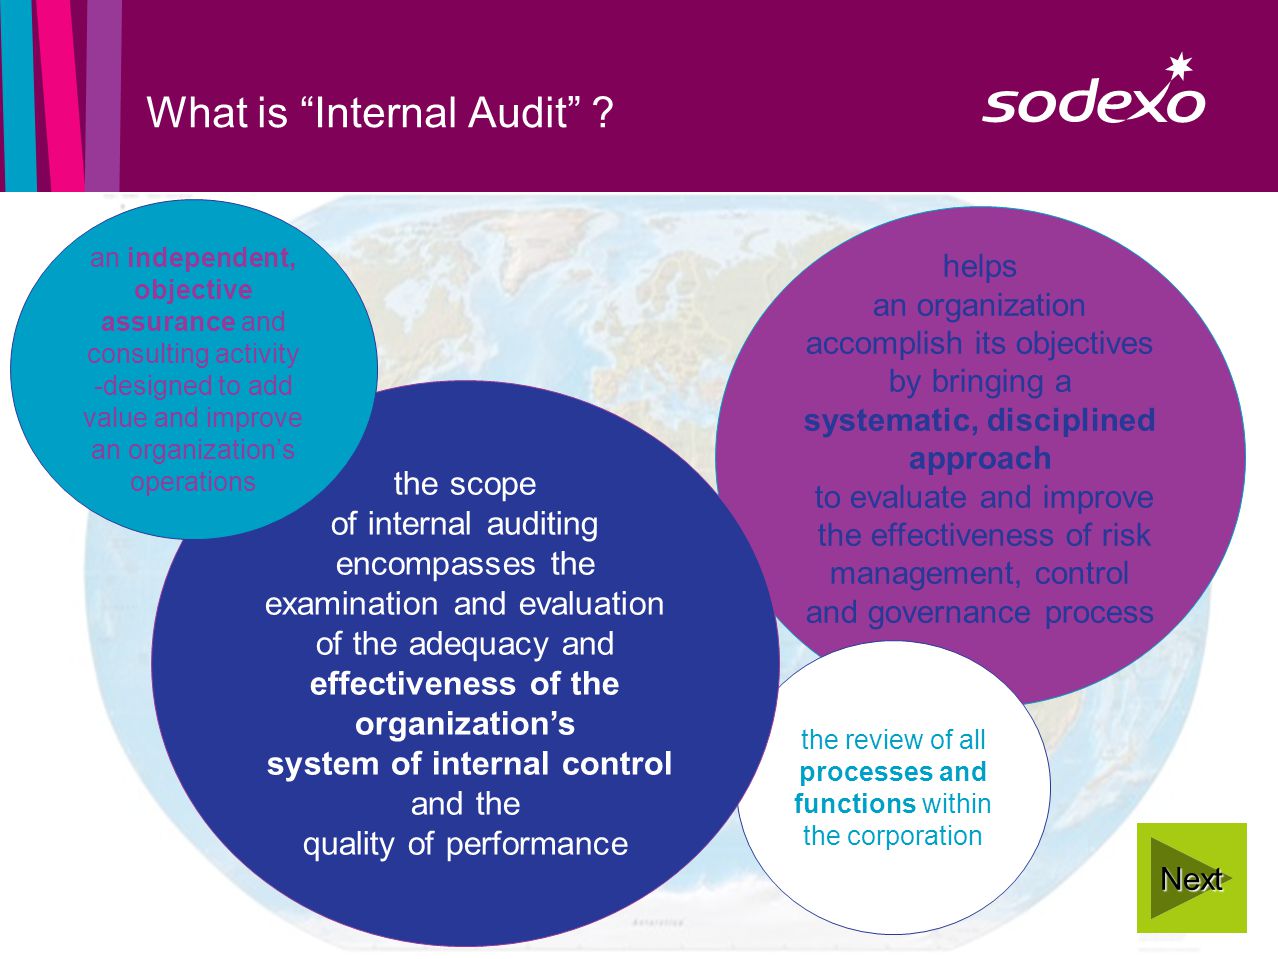 page 2 helps an organization accomplish its objectives by bringing a systematic, disciplined approach to evaluate and improve the effectiveness of risk management, control and governance process What is Internal Audit .